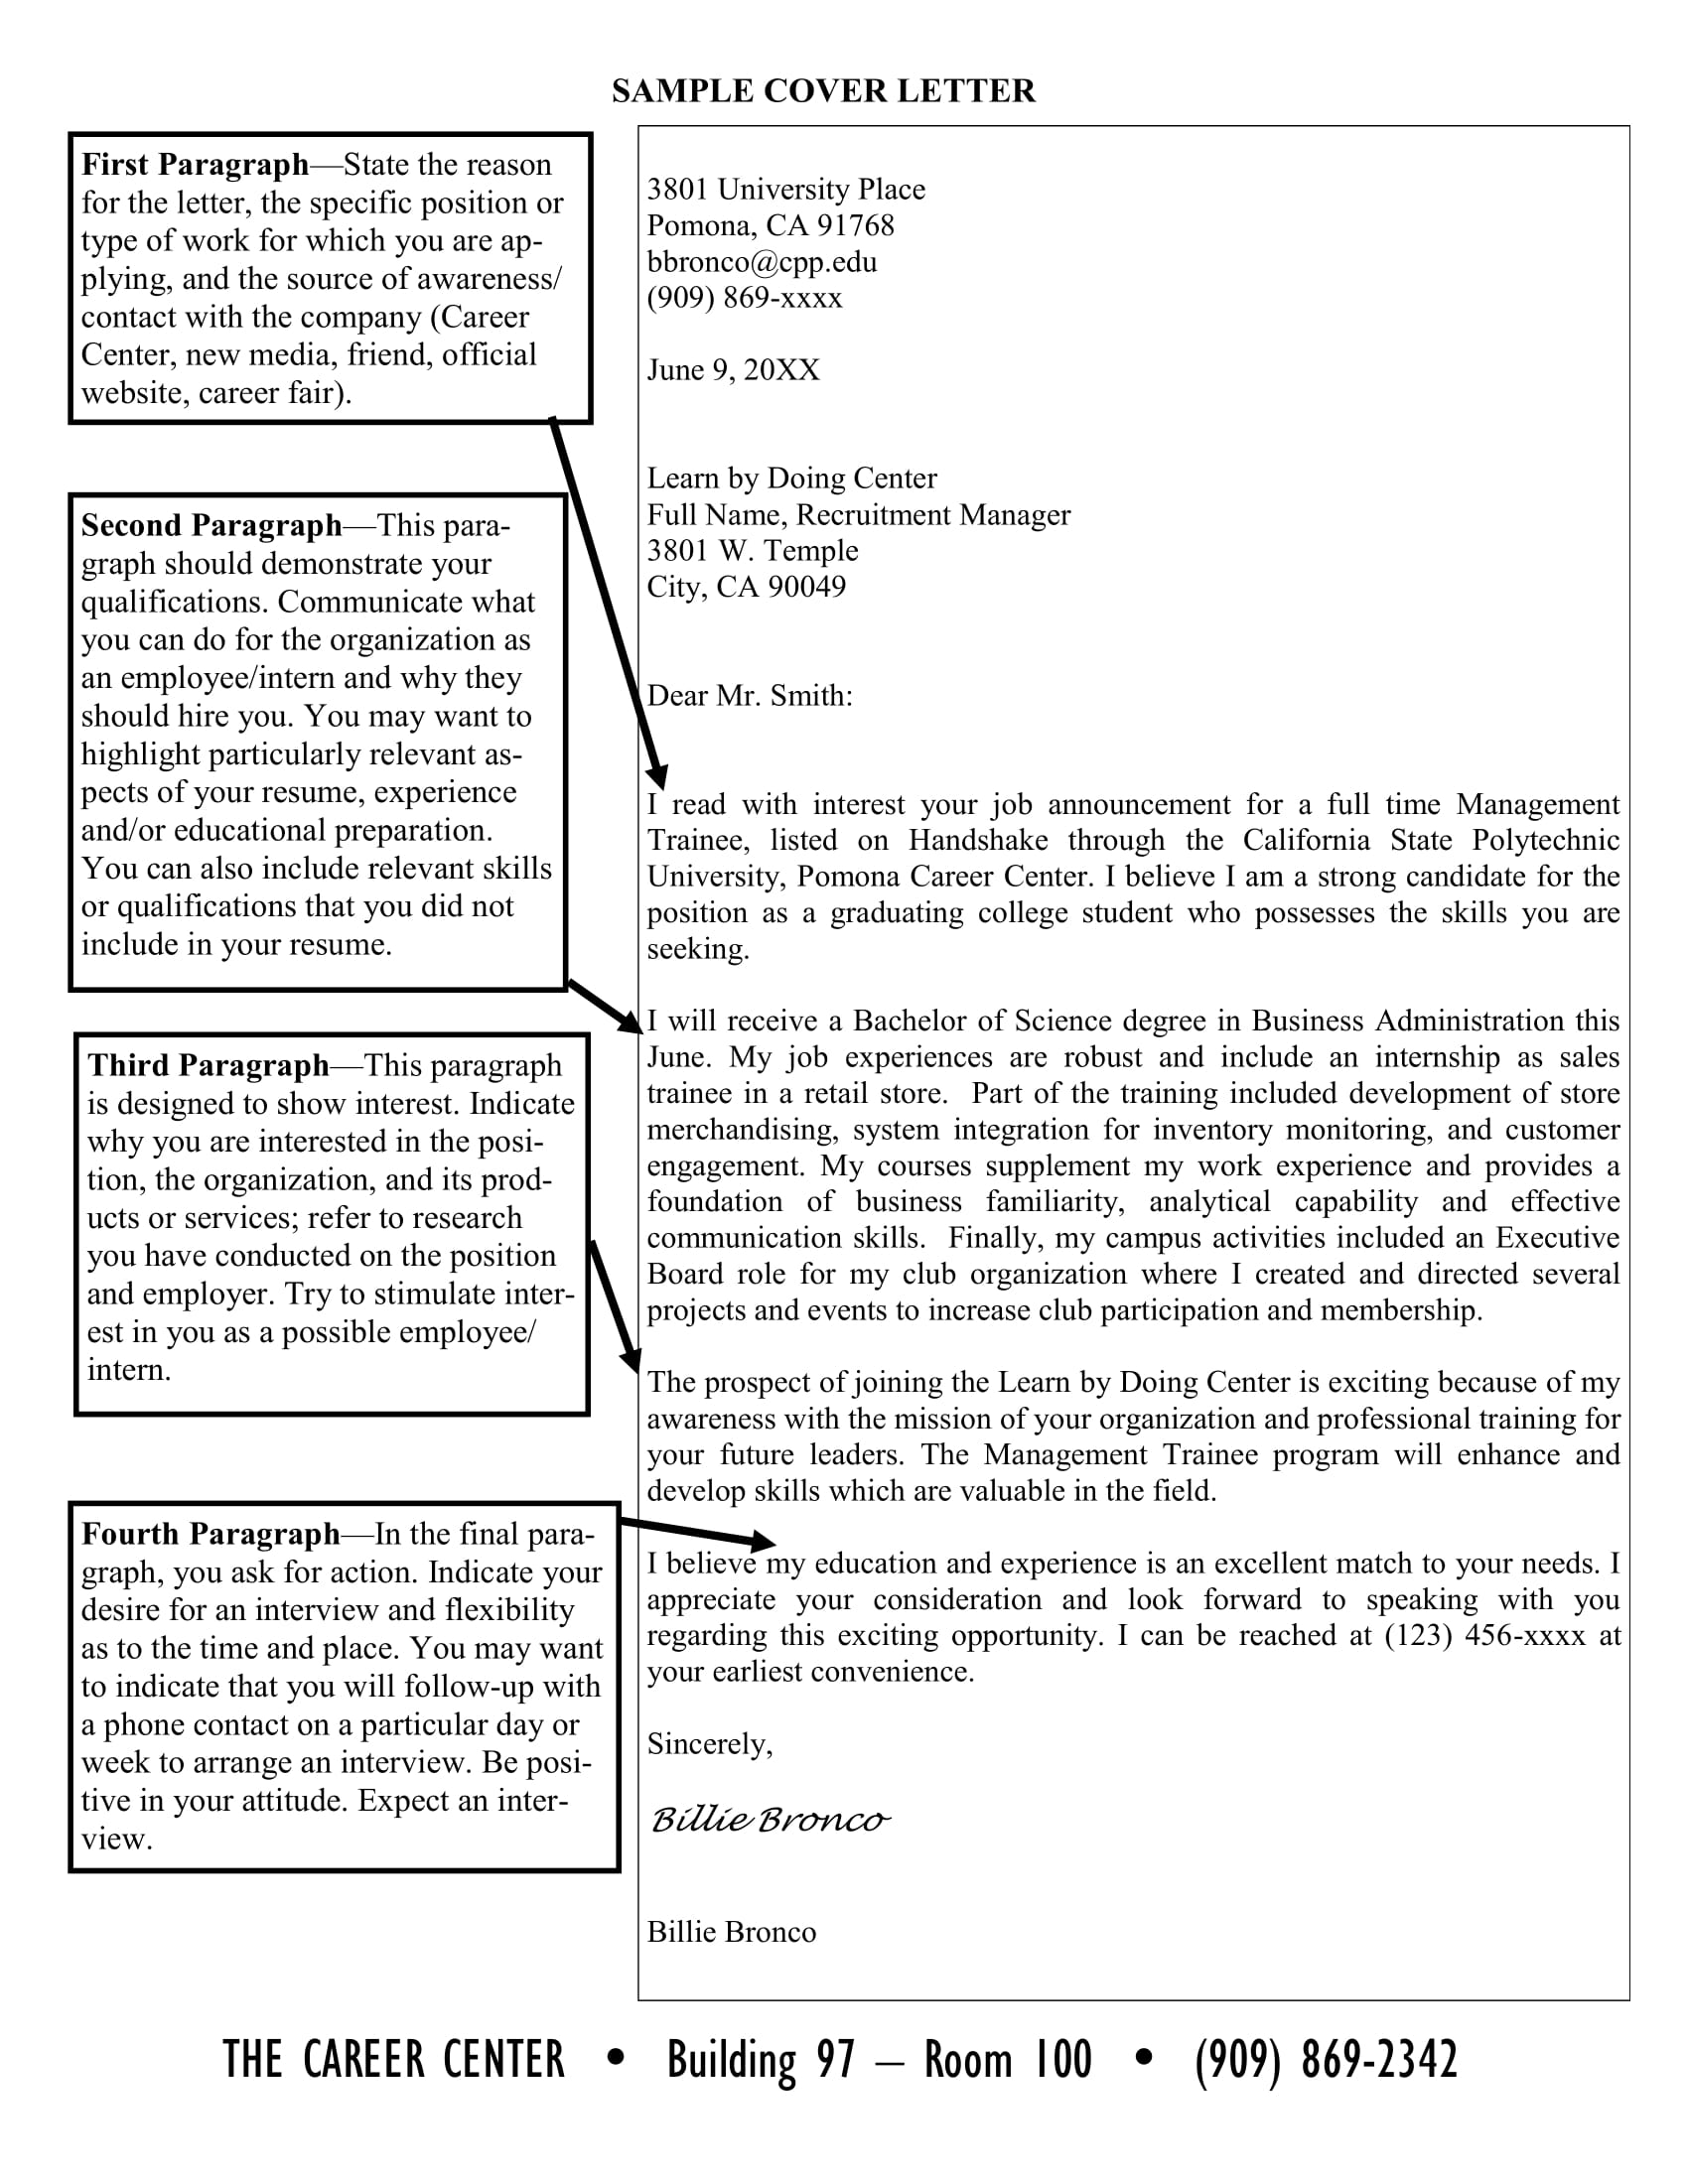 Cover Letter - 45+ Examples, Format, How to Write, Sample, PDF